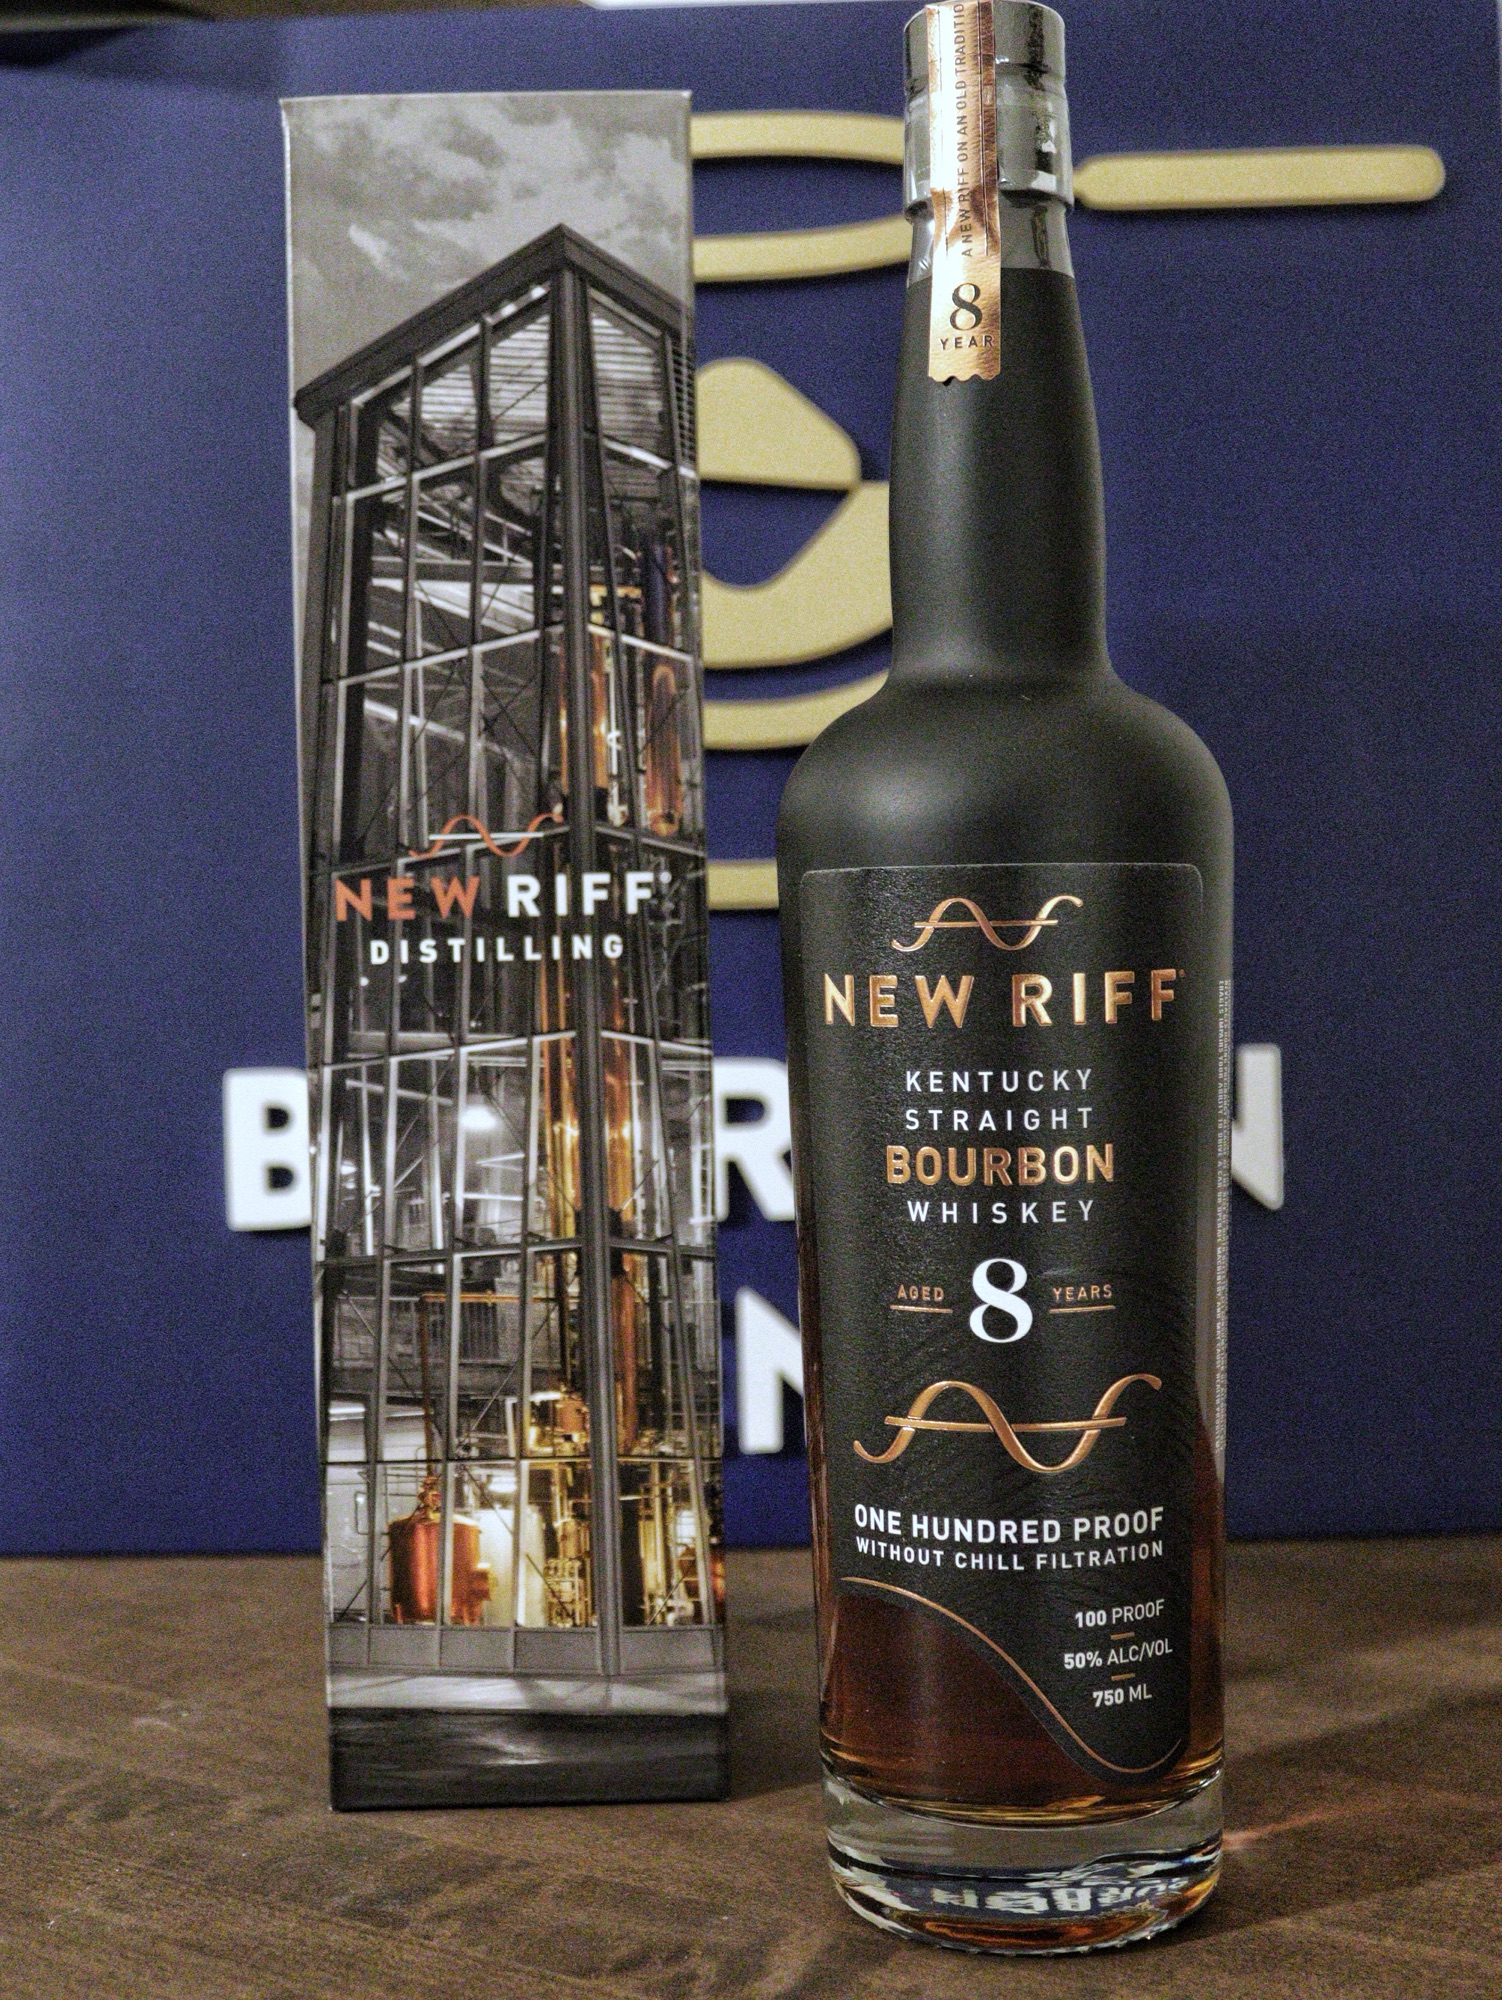 New Riff’s Latest Bourbon Brings an 8 Year Age Statement